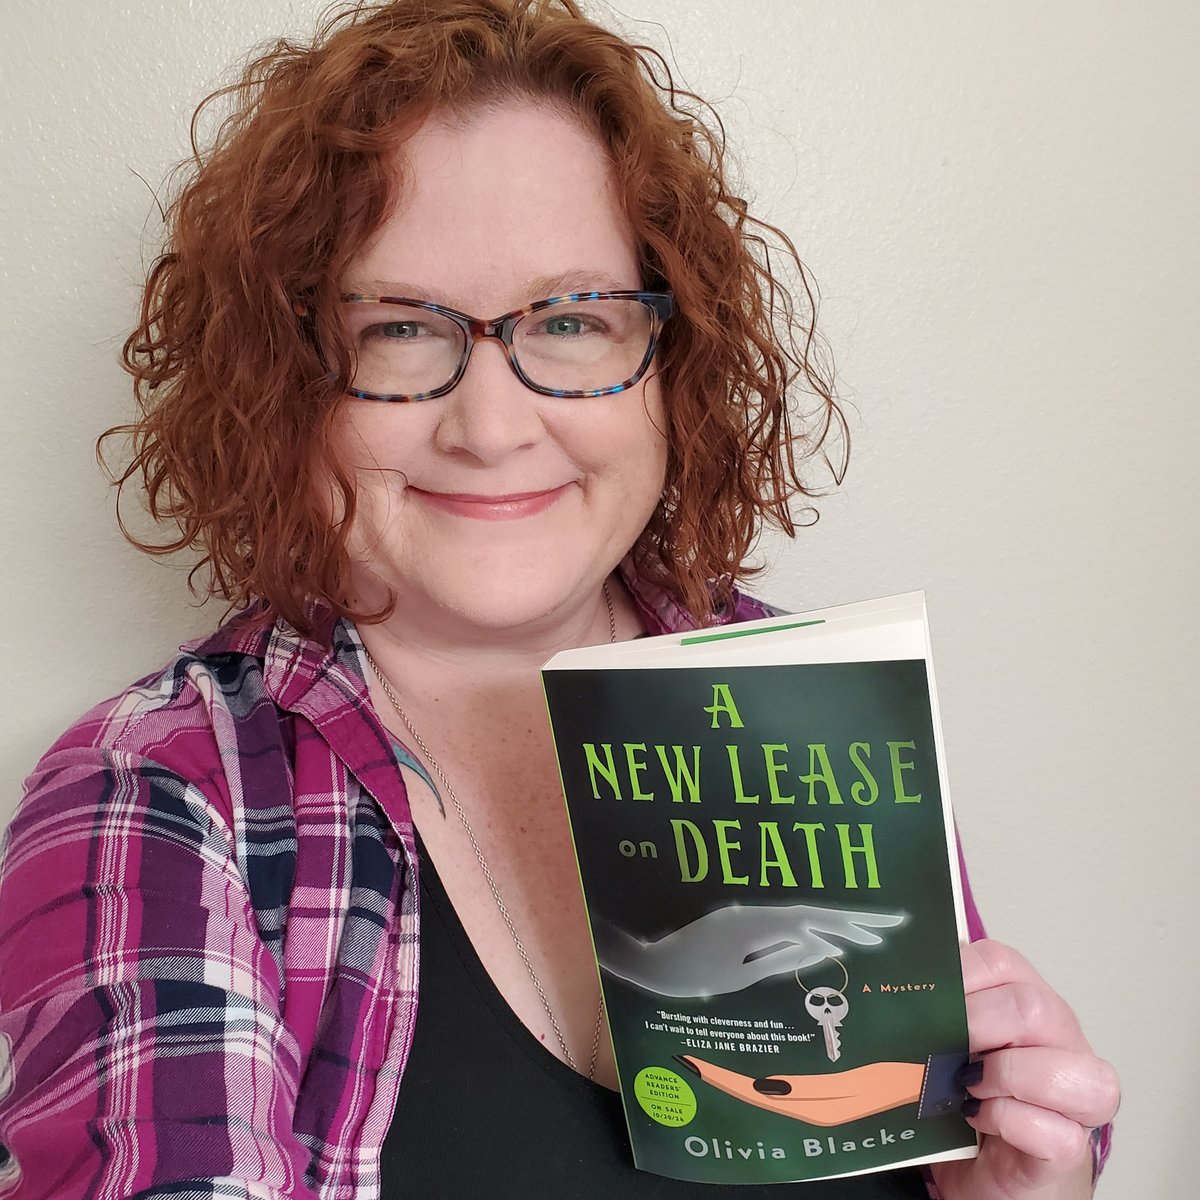 Are you as excited about A NEW LEASE ON DEATH as I am? 👻 I'm starting to see early readers posting about receiving ARCs and I'm just plain GIDDY with excitement. Note: in the picture, I'm holding a GORGEOUS paper ARC. #ANLOD comes out Oct 29: bit.ly/ANLOD